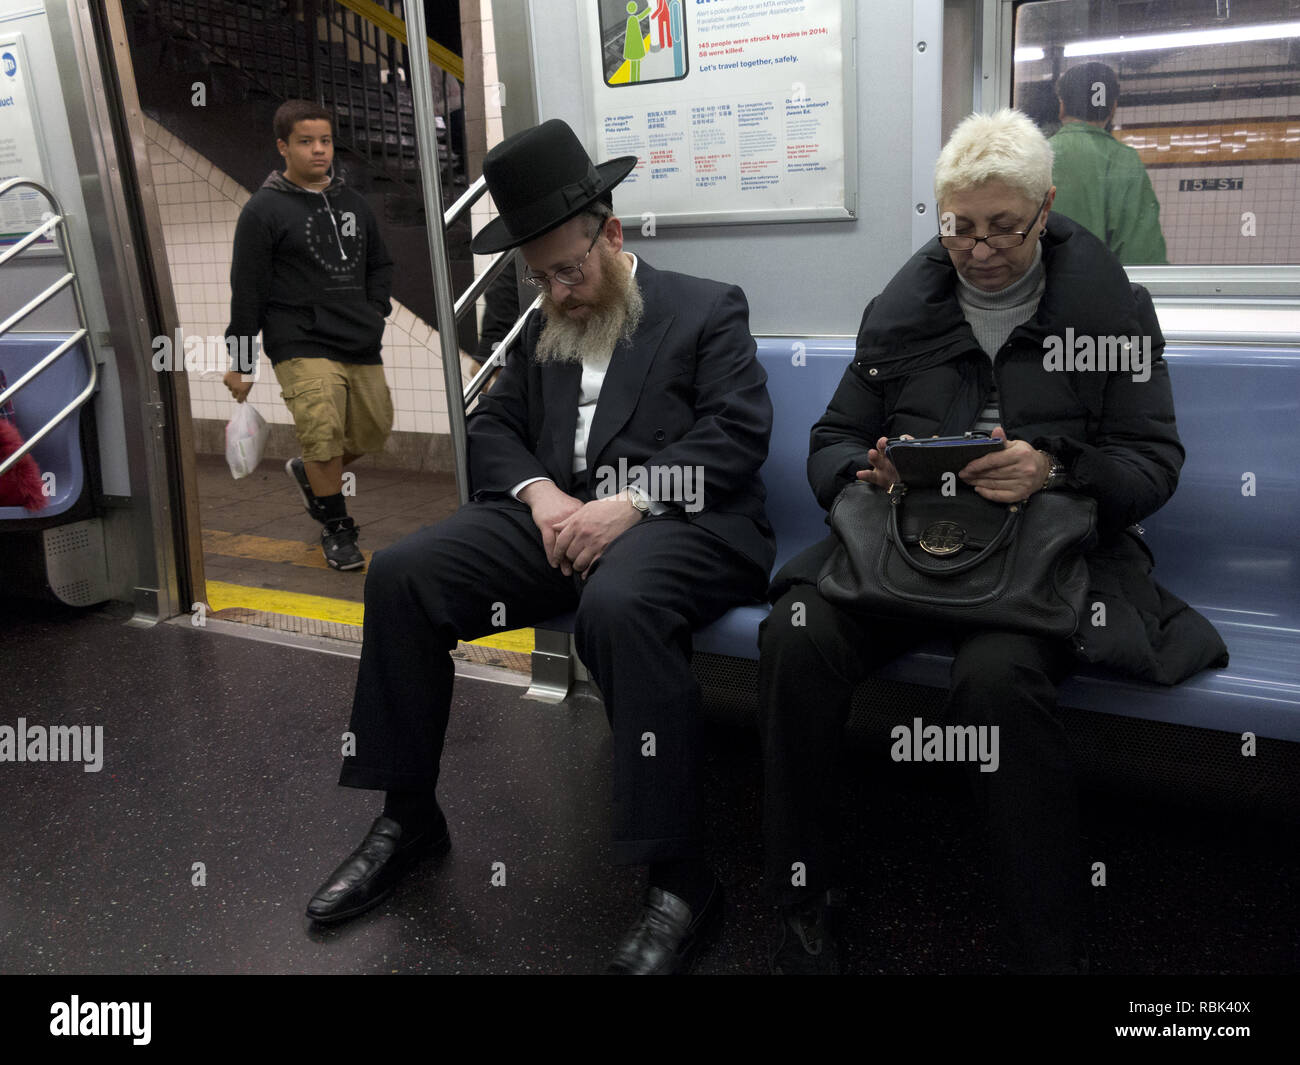 NYC subway commuters on the F train in Brooklyn, NY. Stock Photo